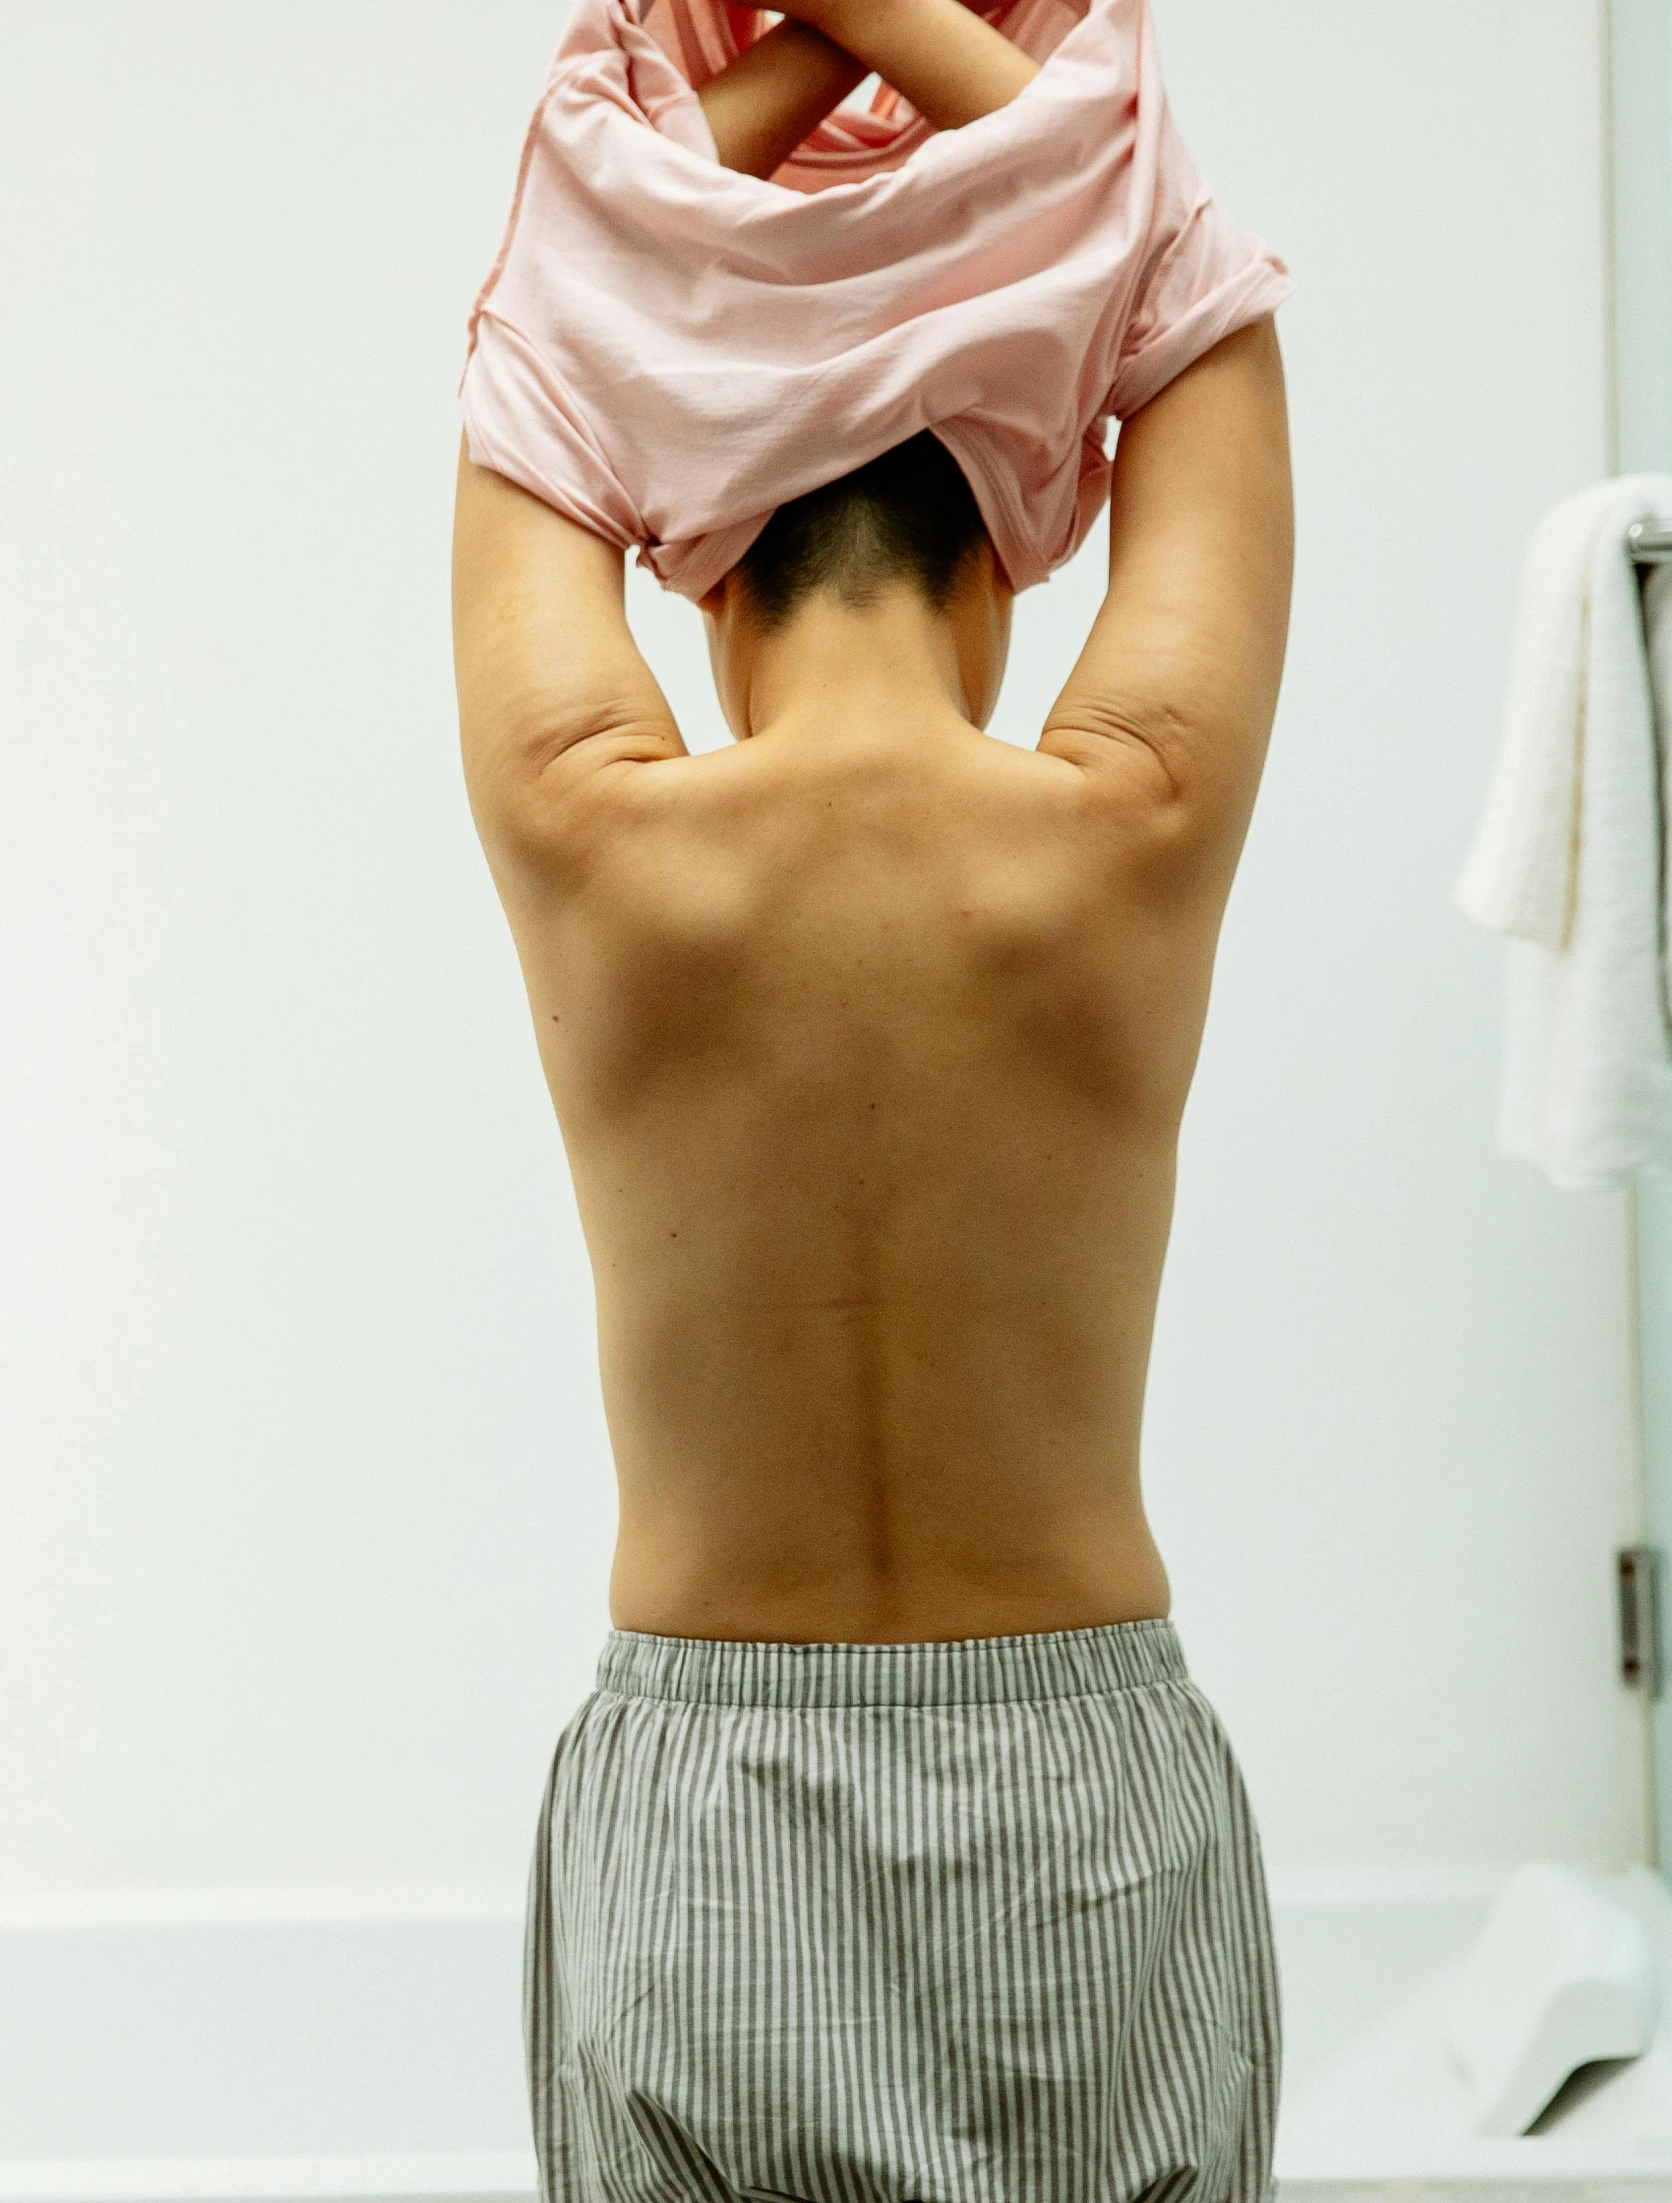 a man standing in front of a mirror holding a baby, a statue, by Tadashige Ono, bare back, sport bra and shirt, medical image, showers